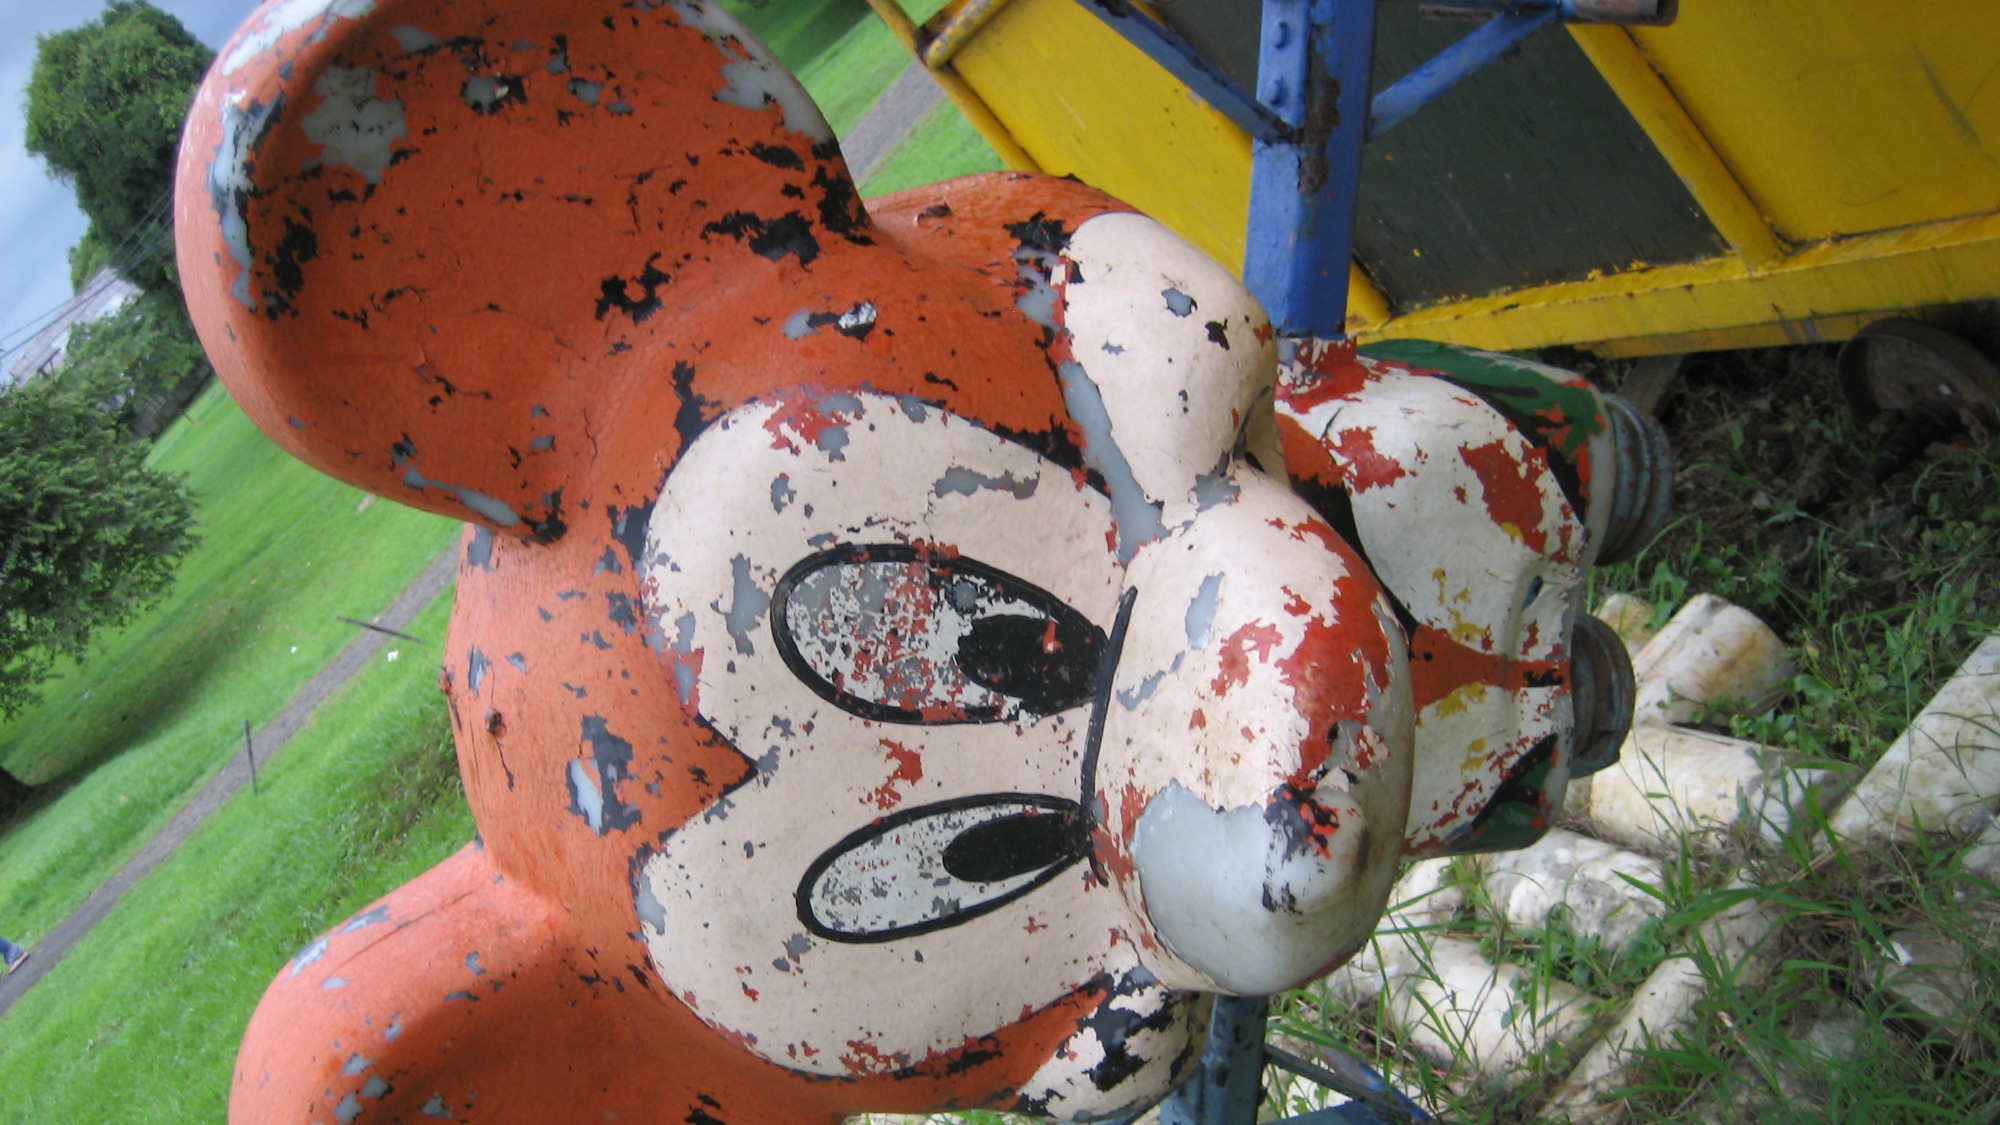 Mickey Mouse playground equipment